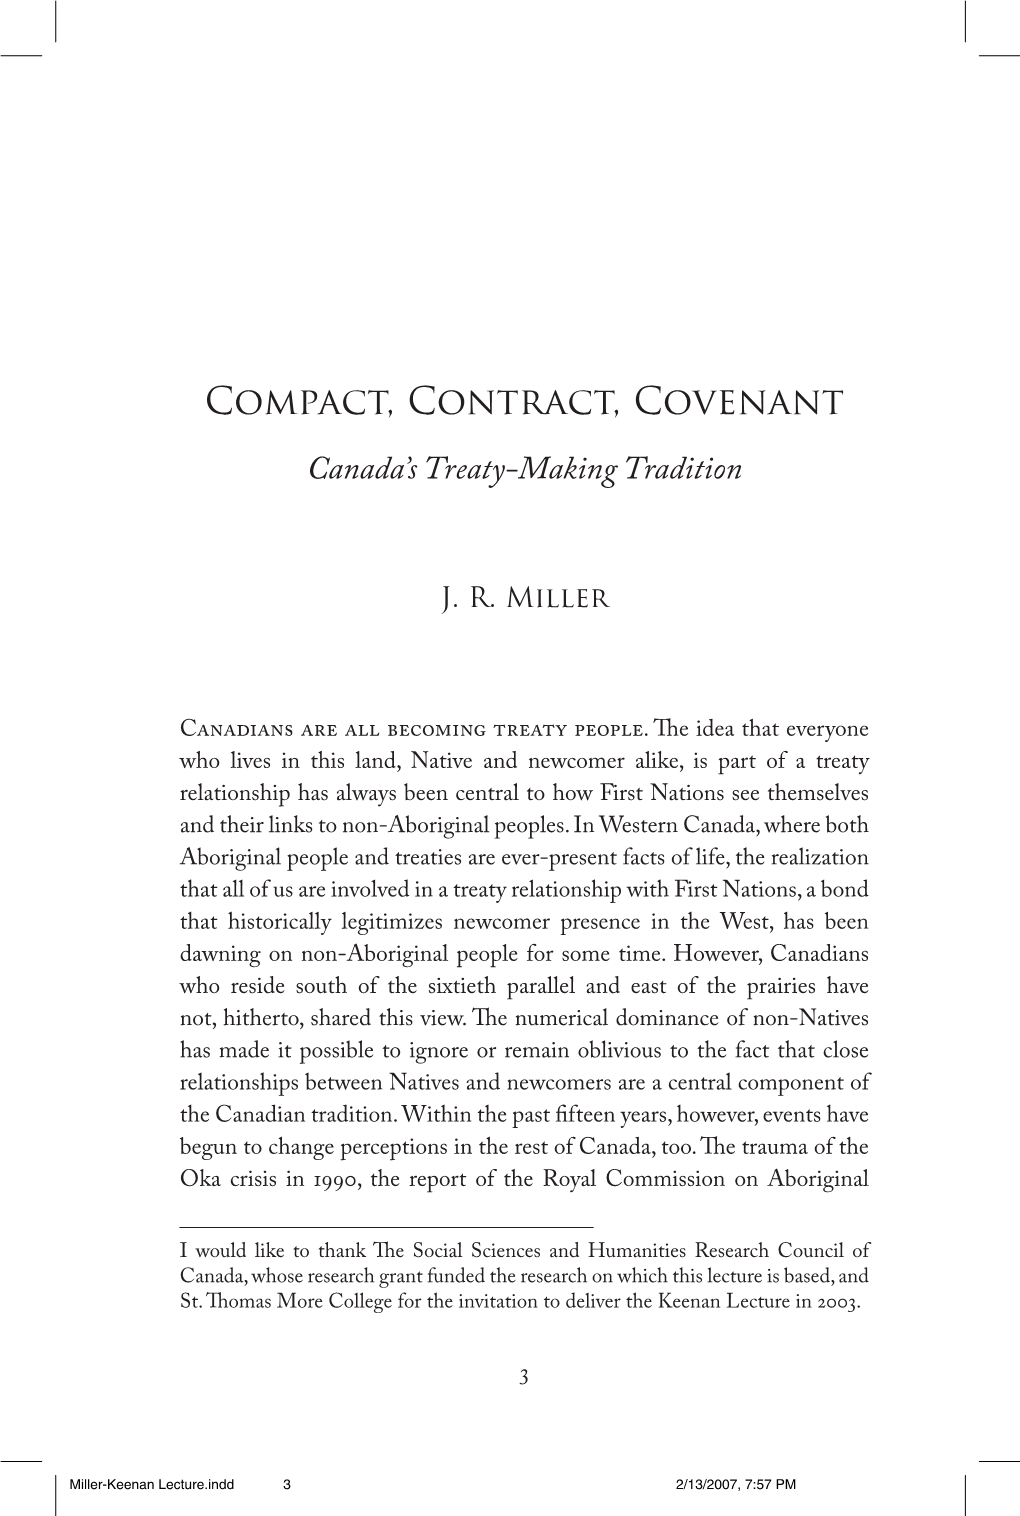 Compact, Contract, Covenant: Canada's Treaty-Making Tradition